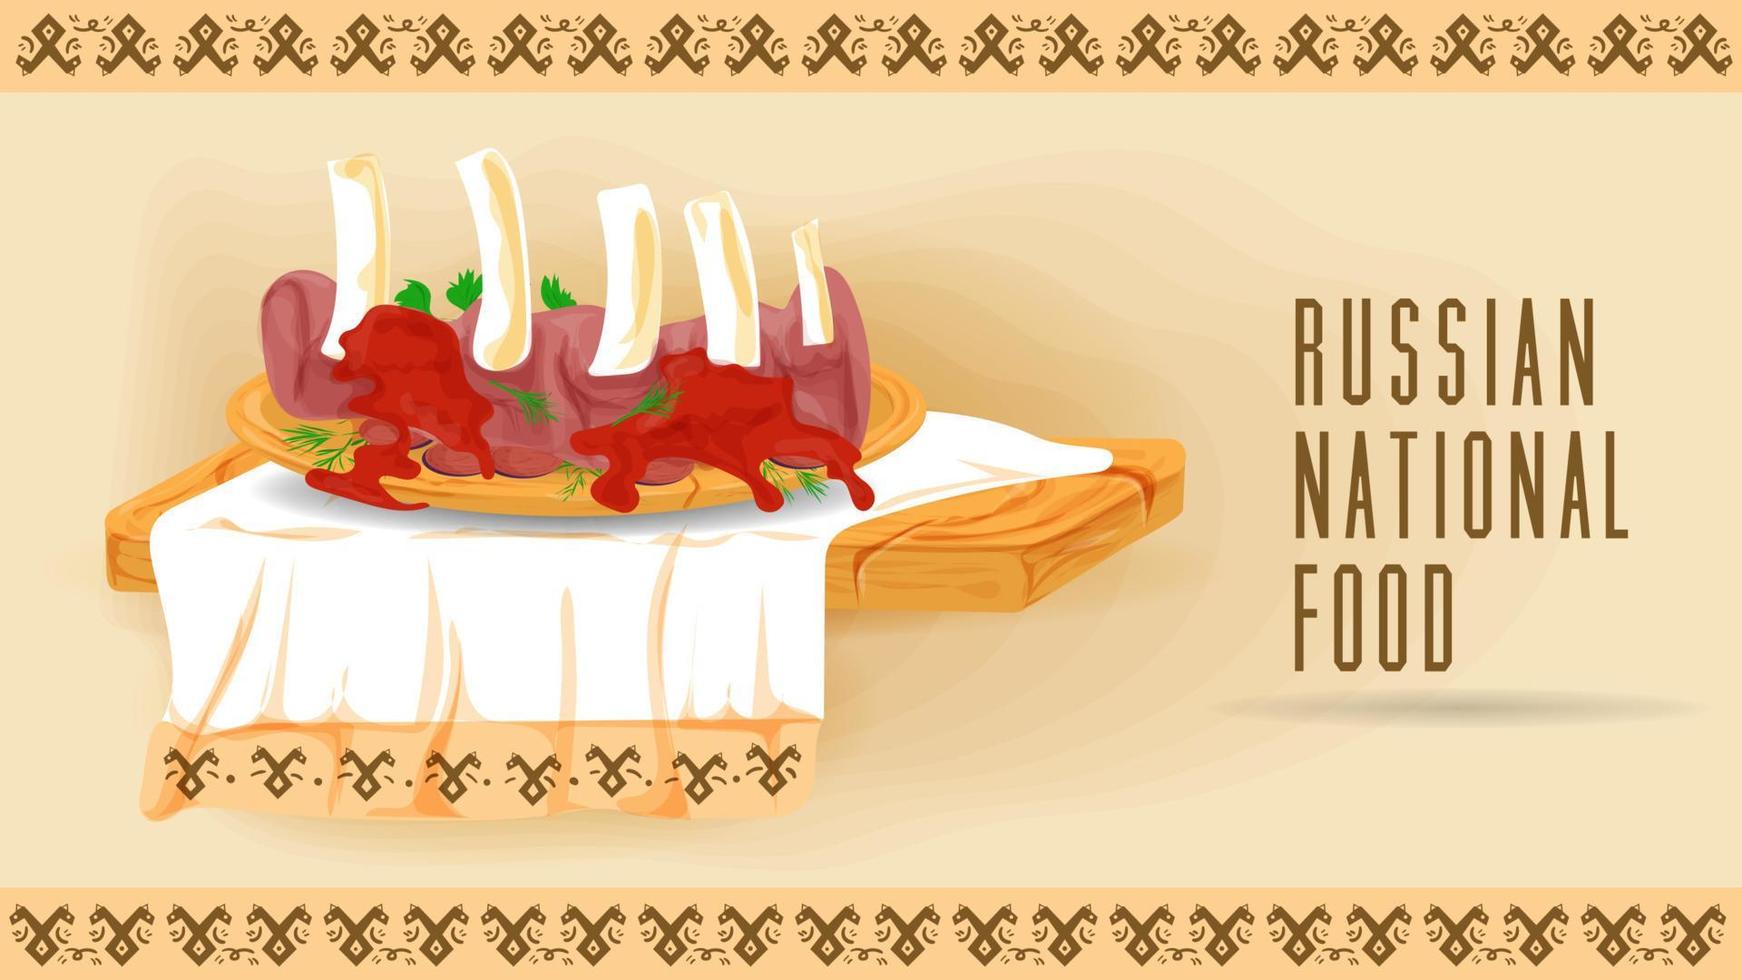 fried ribs in red sauce on a wooden platter on a towel with an ornament flat illustration of traditional food vector